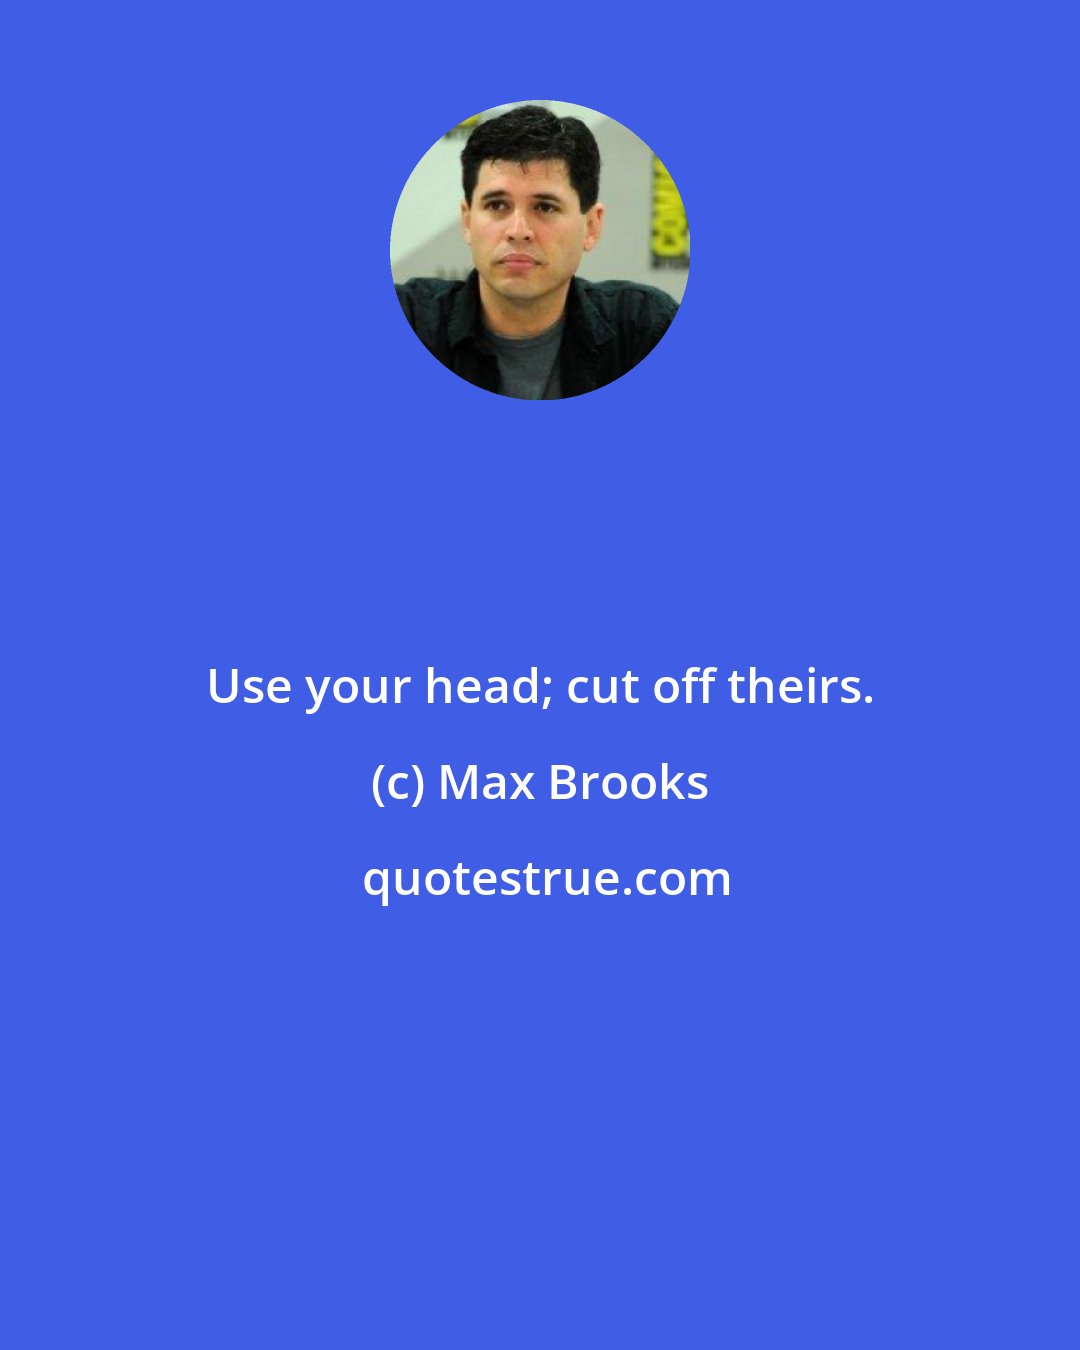 Max Brooks: Use your head; cut off theirs.